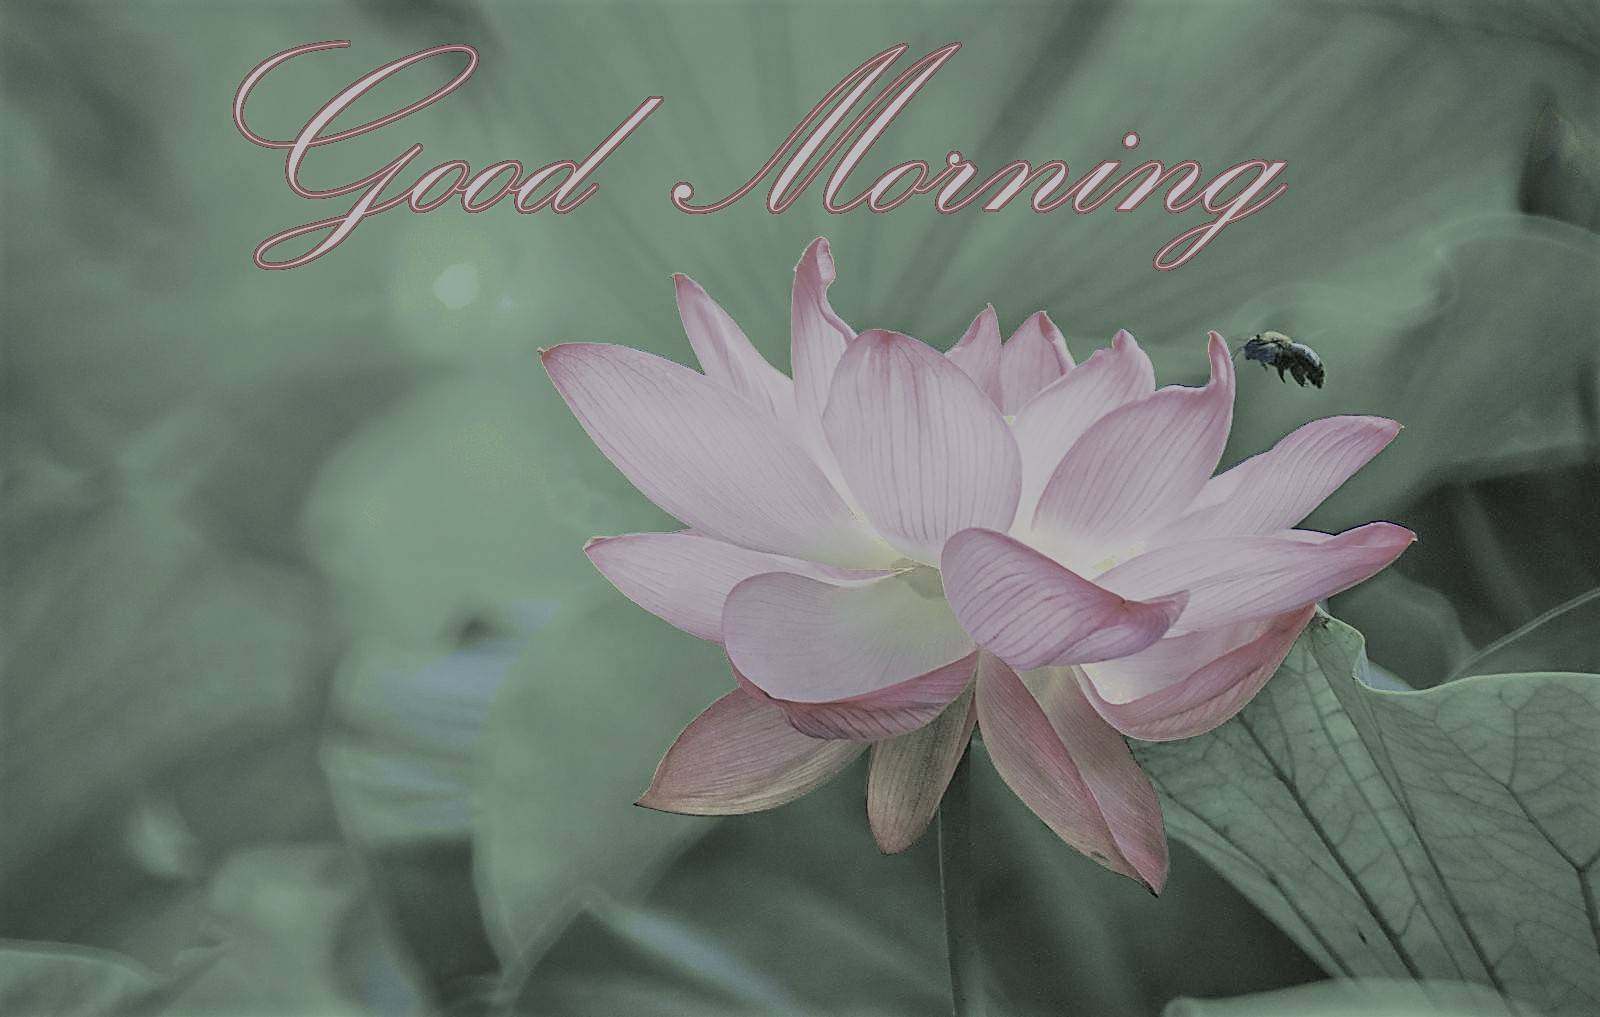 Good Morning Image Download For Whatsapp - HD Wallpaper 